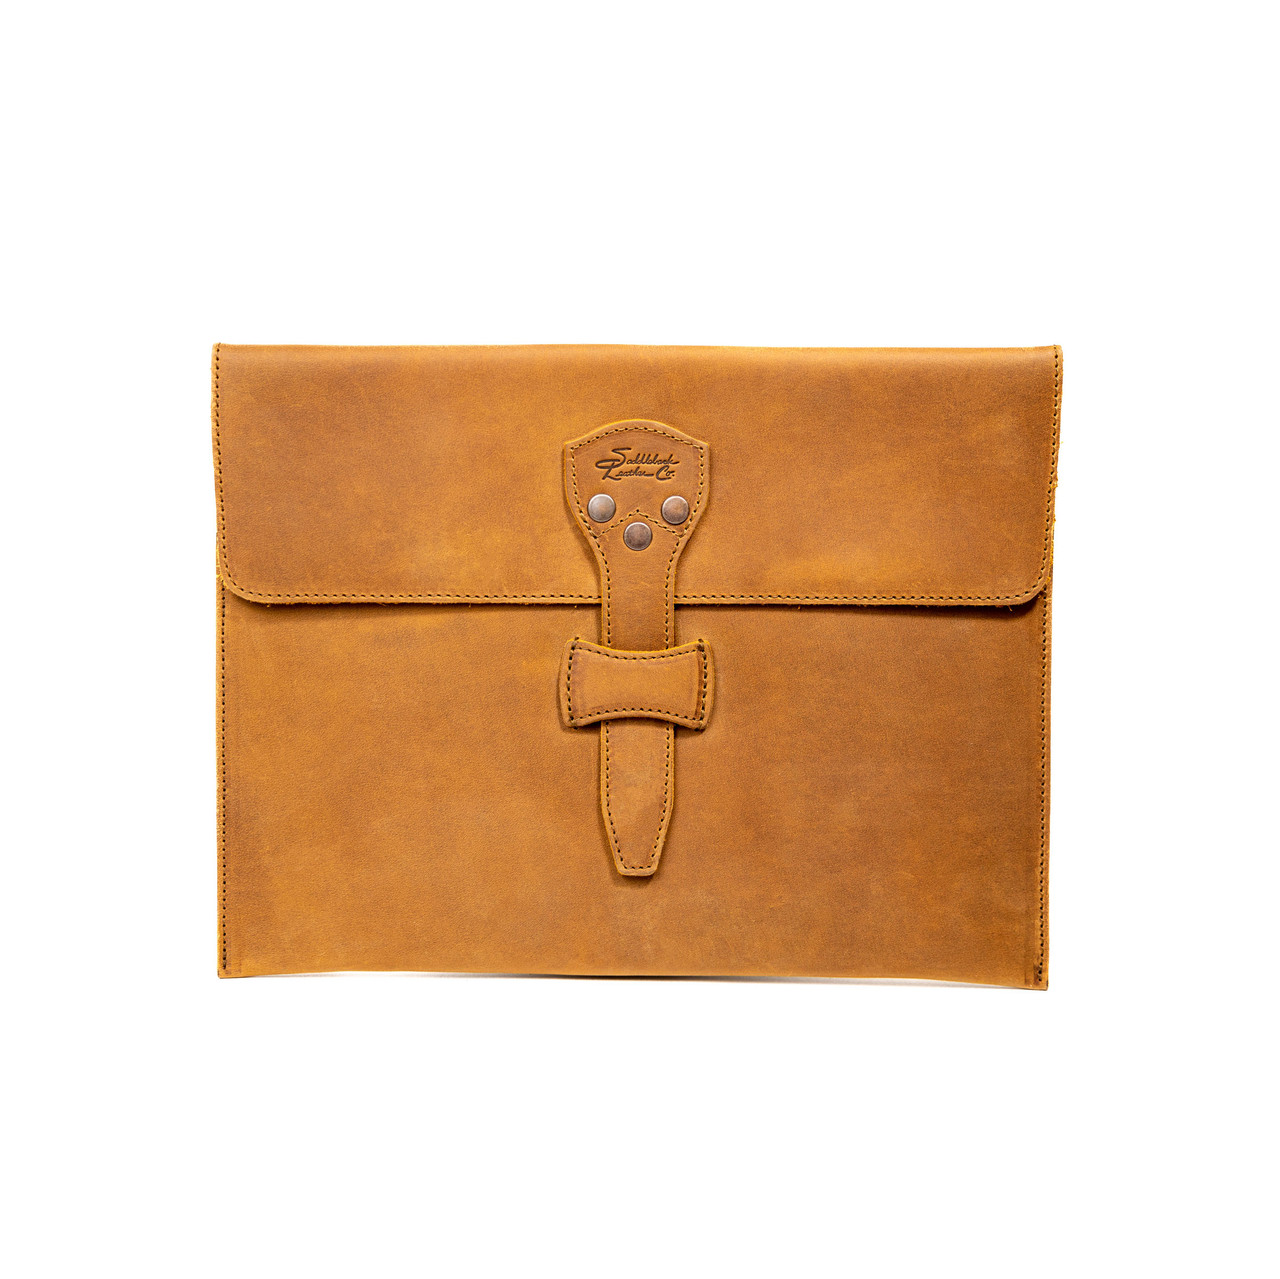 Document holder in leather and woven loincloth